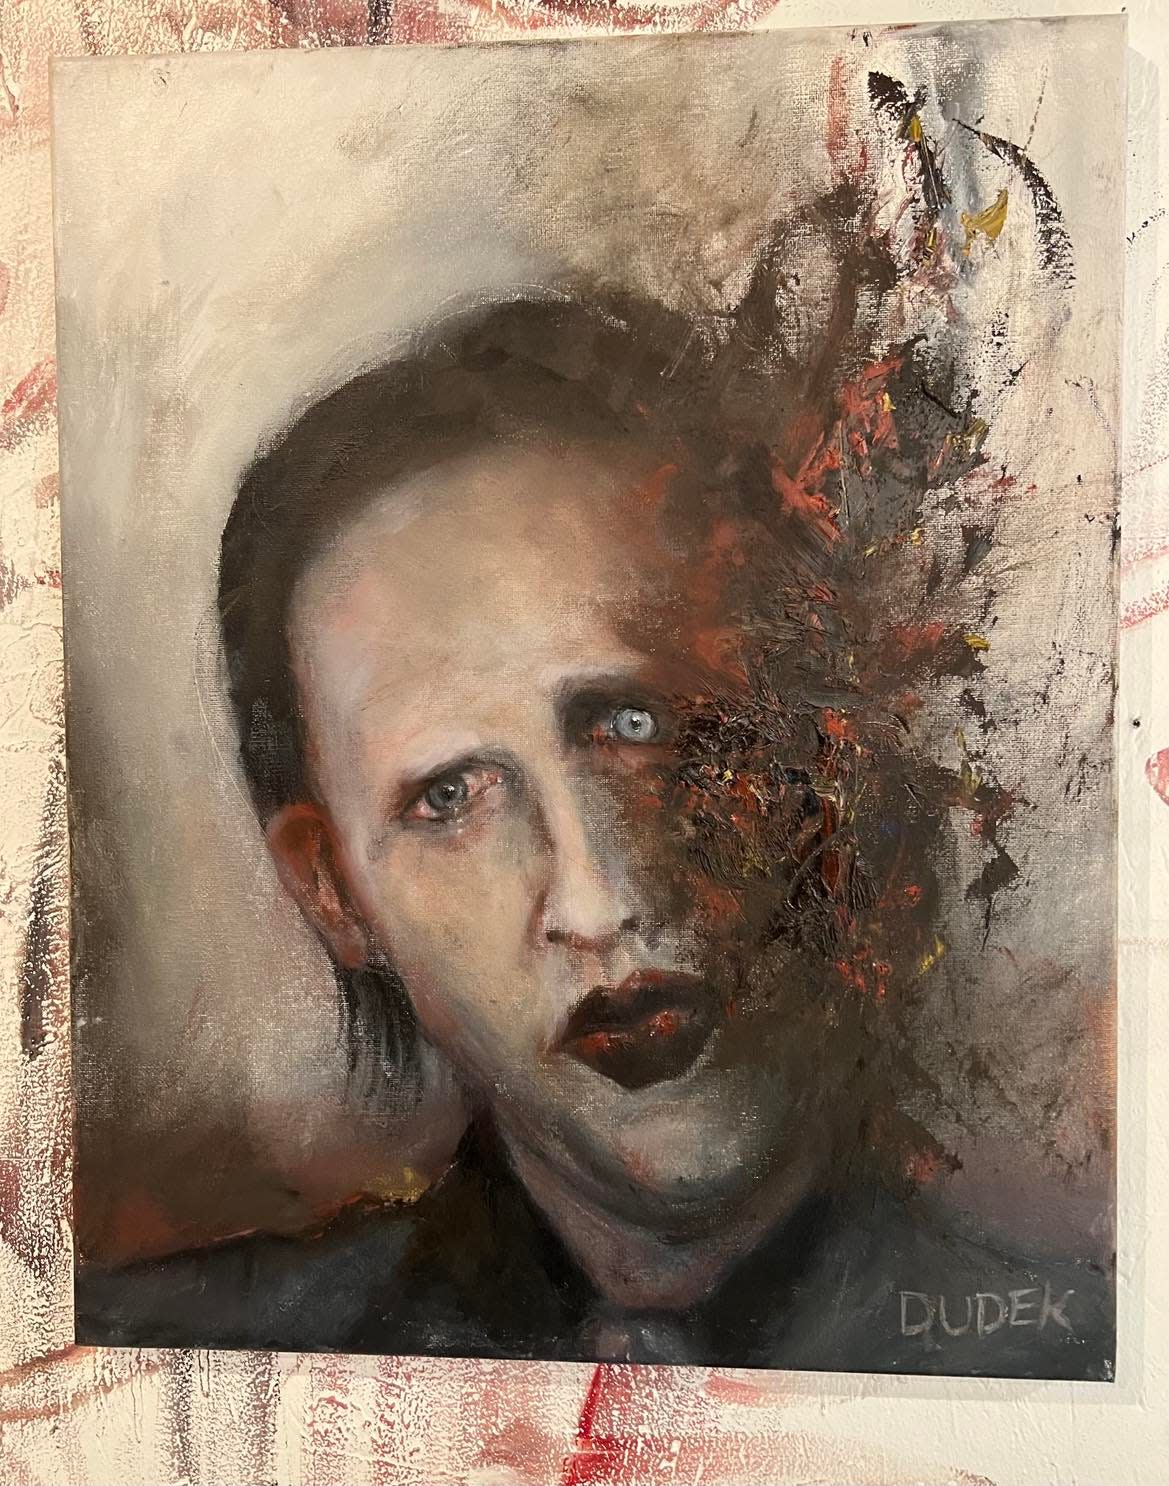 Canton area artist Drew Dudek will open an exhibit of his unique style of portrait painting in the loft studio space on the second floor of Patina Arts Centre in downtown Canton during September's First Friday events.